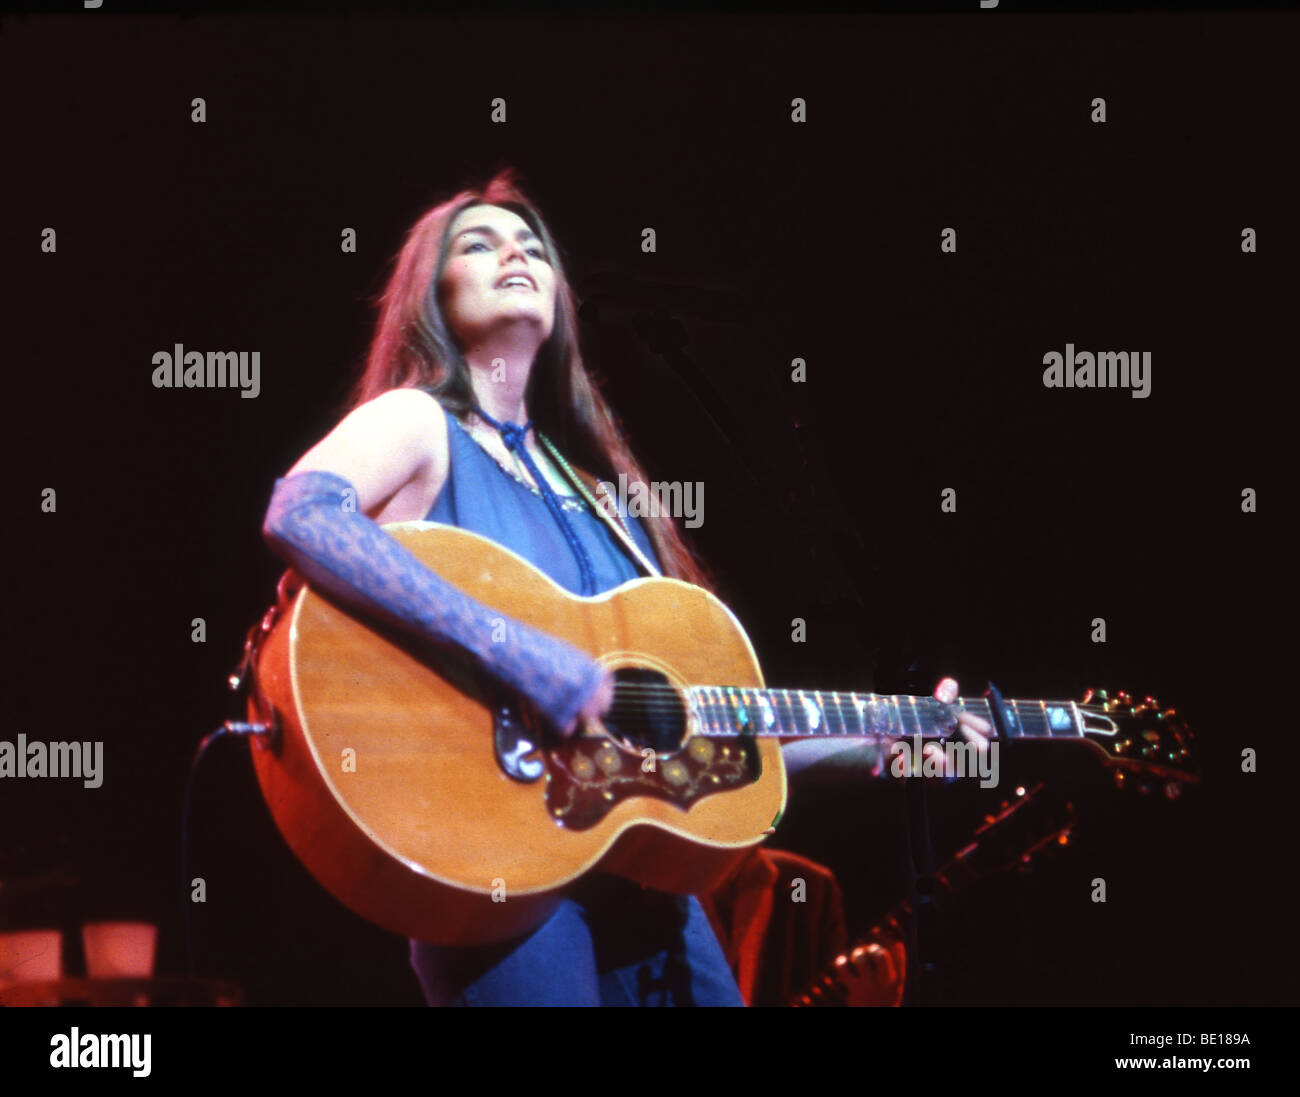 EMMYLOU HARRIS - US Country & Western singer Stock Photo